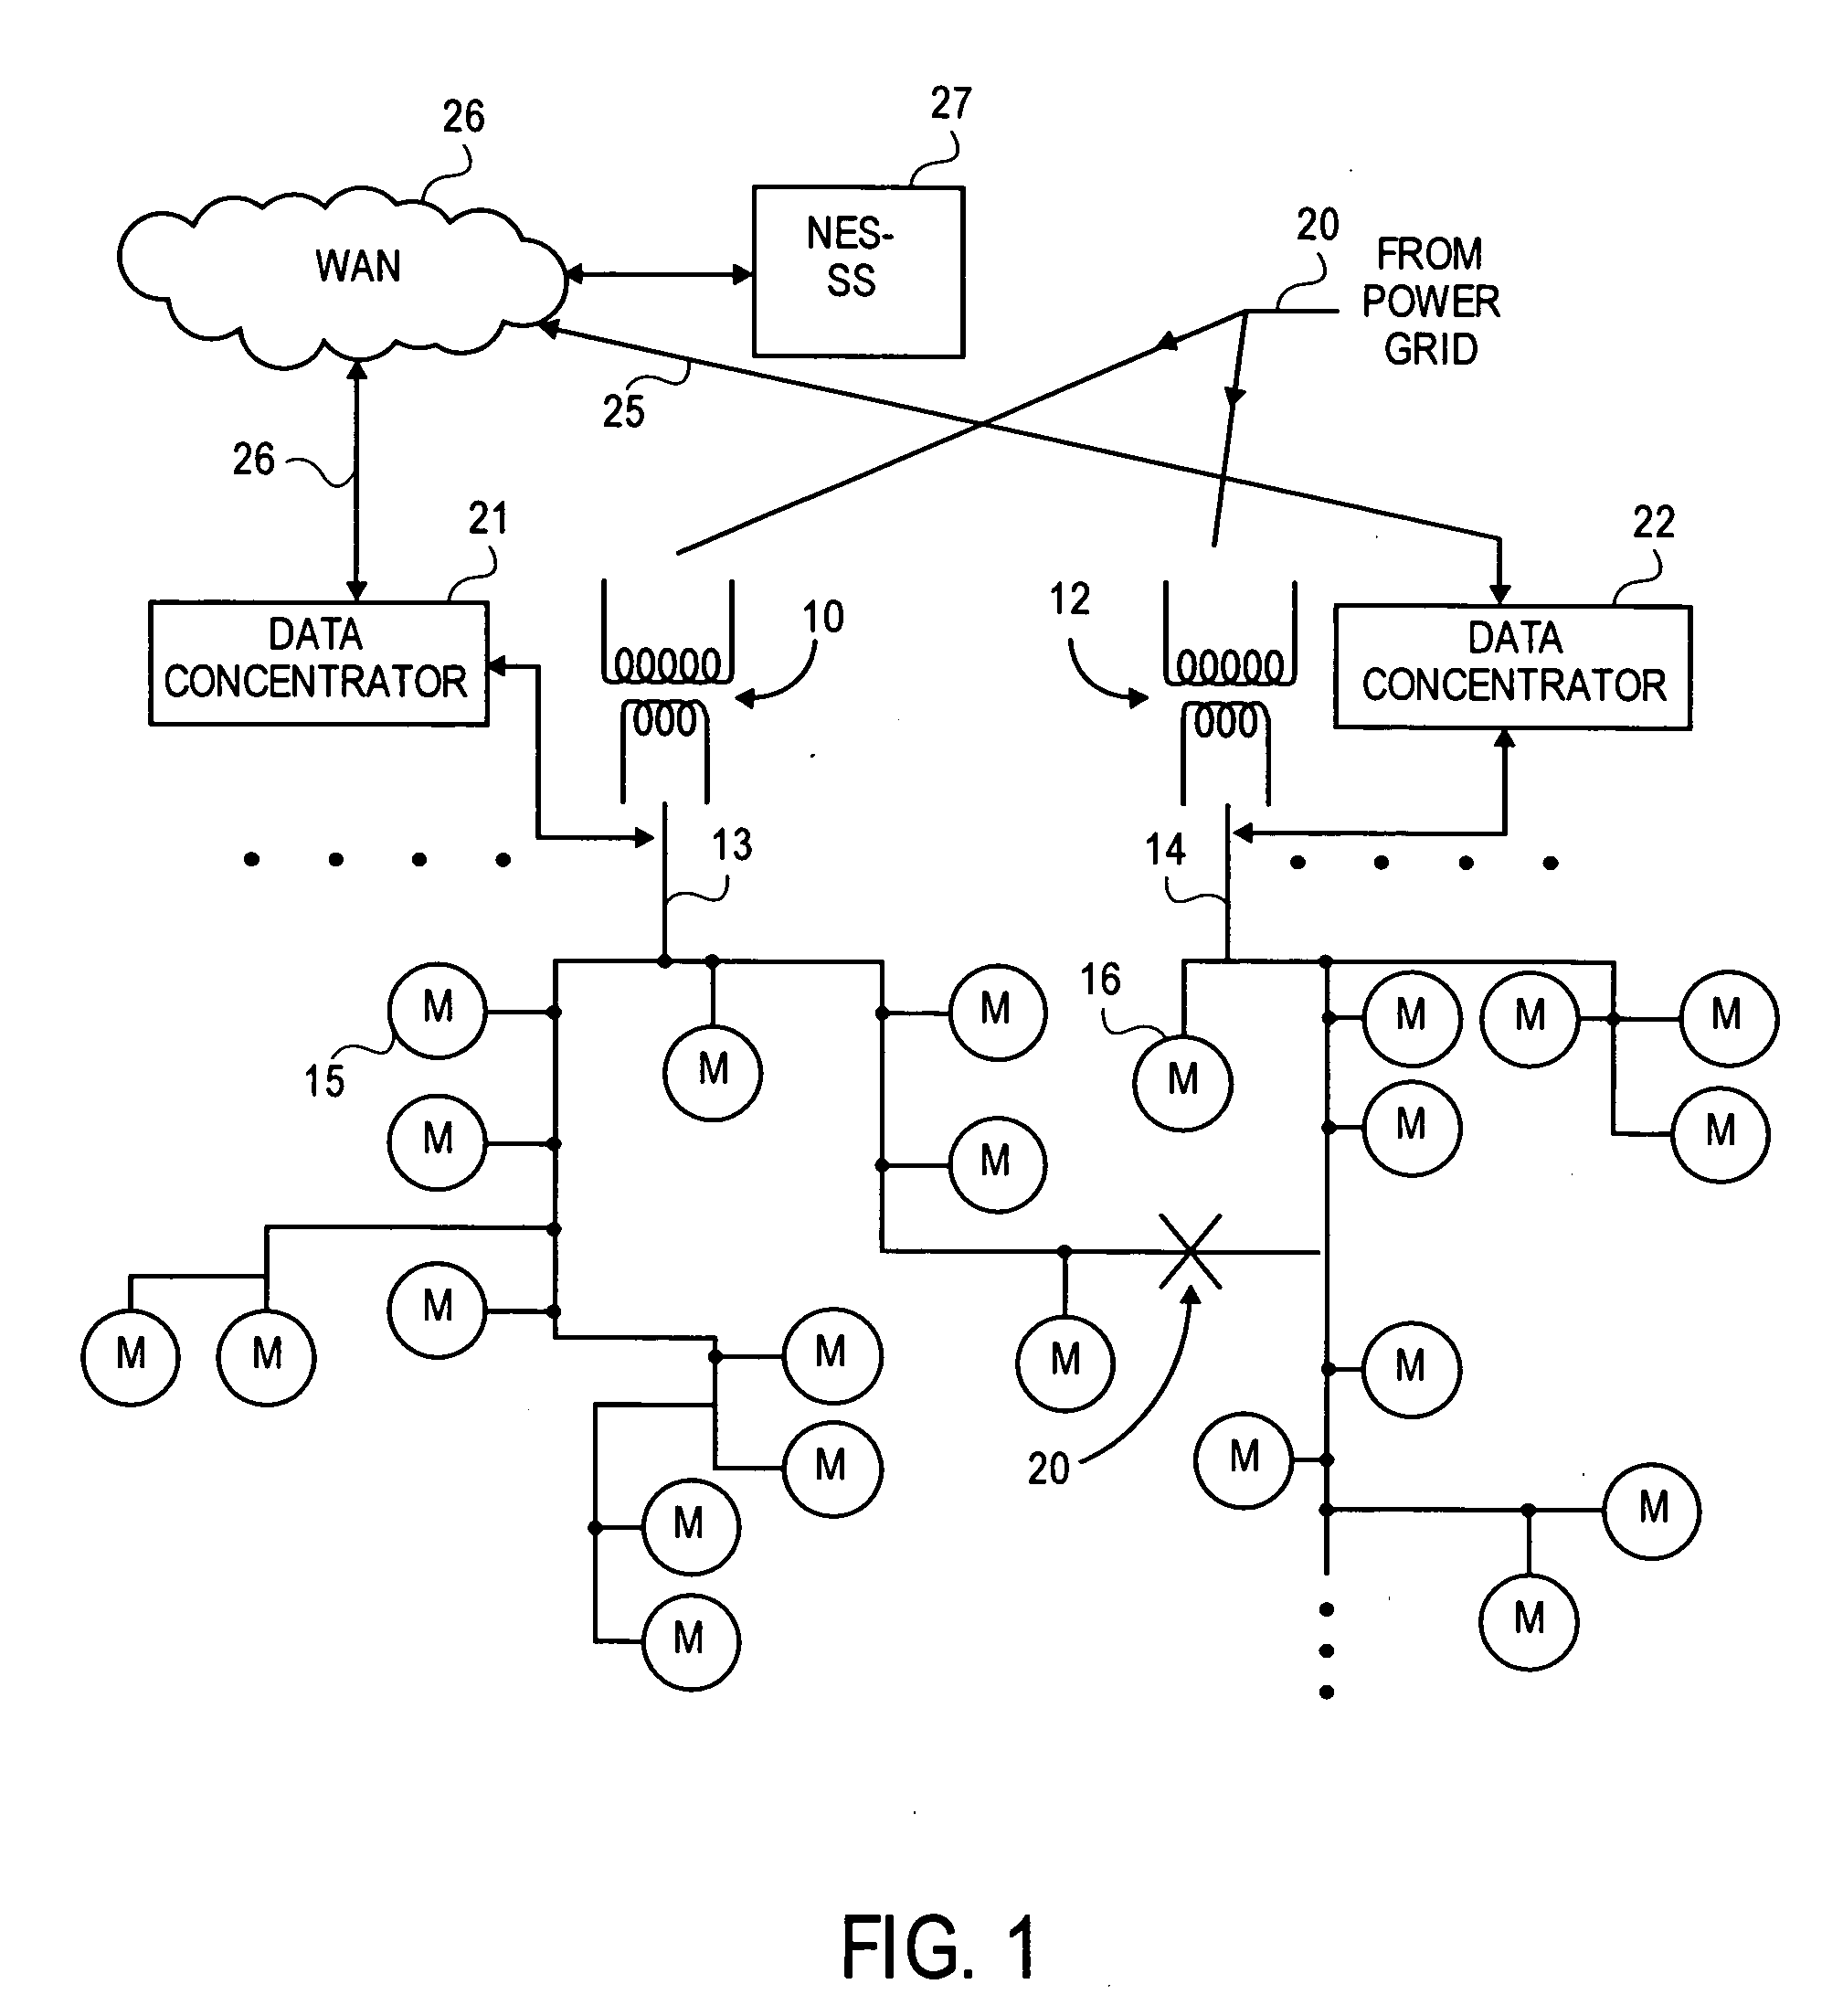 Automated topology discovery and management for electric meters